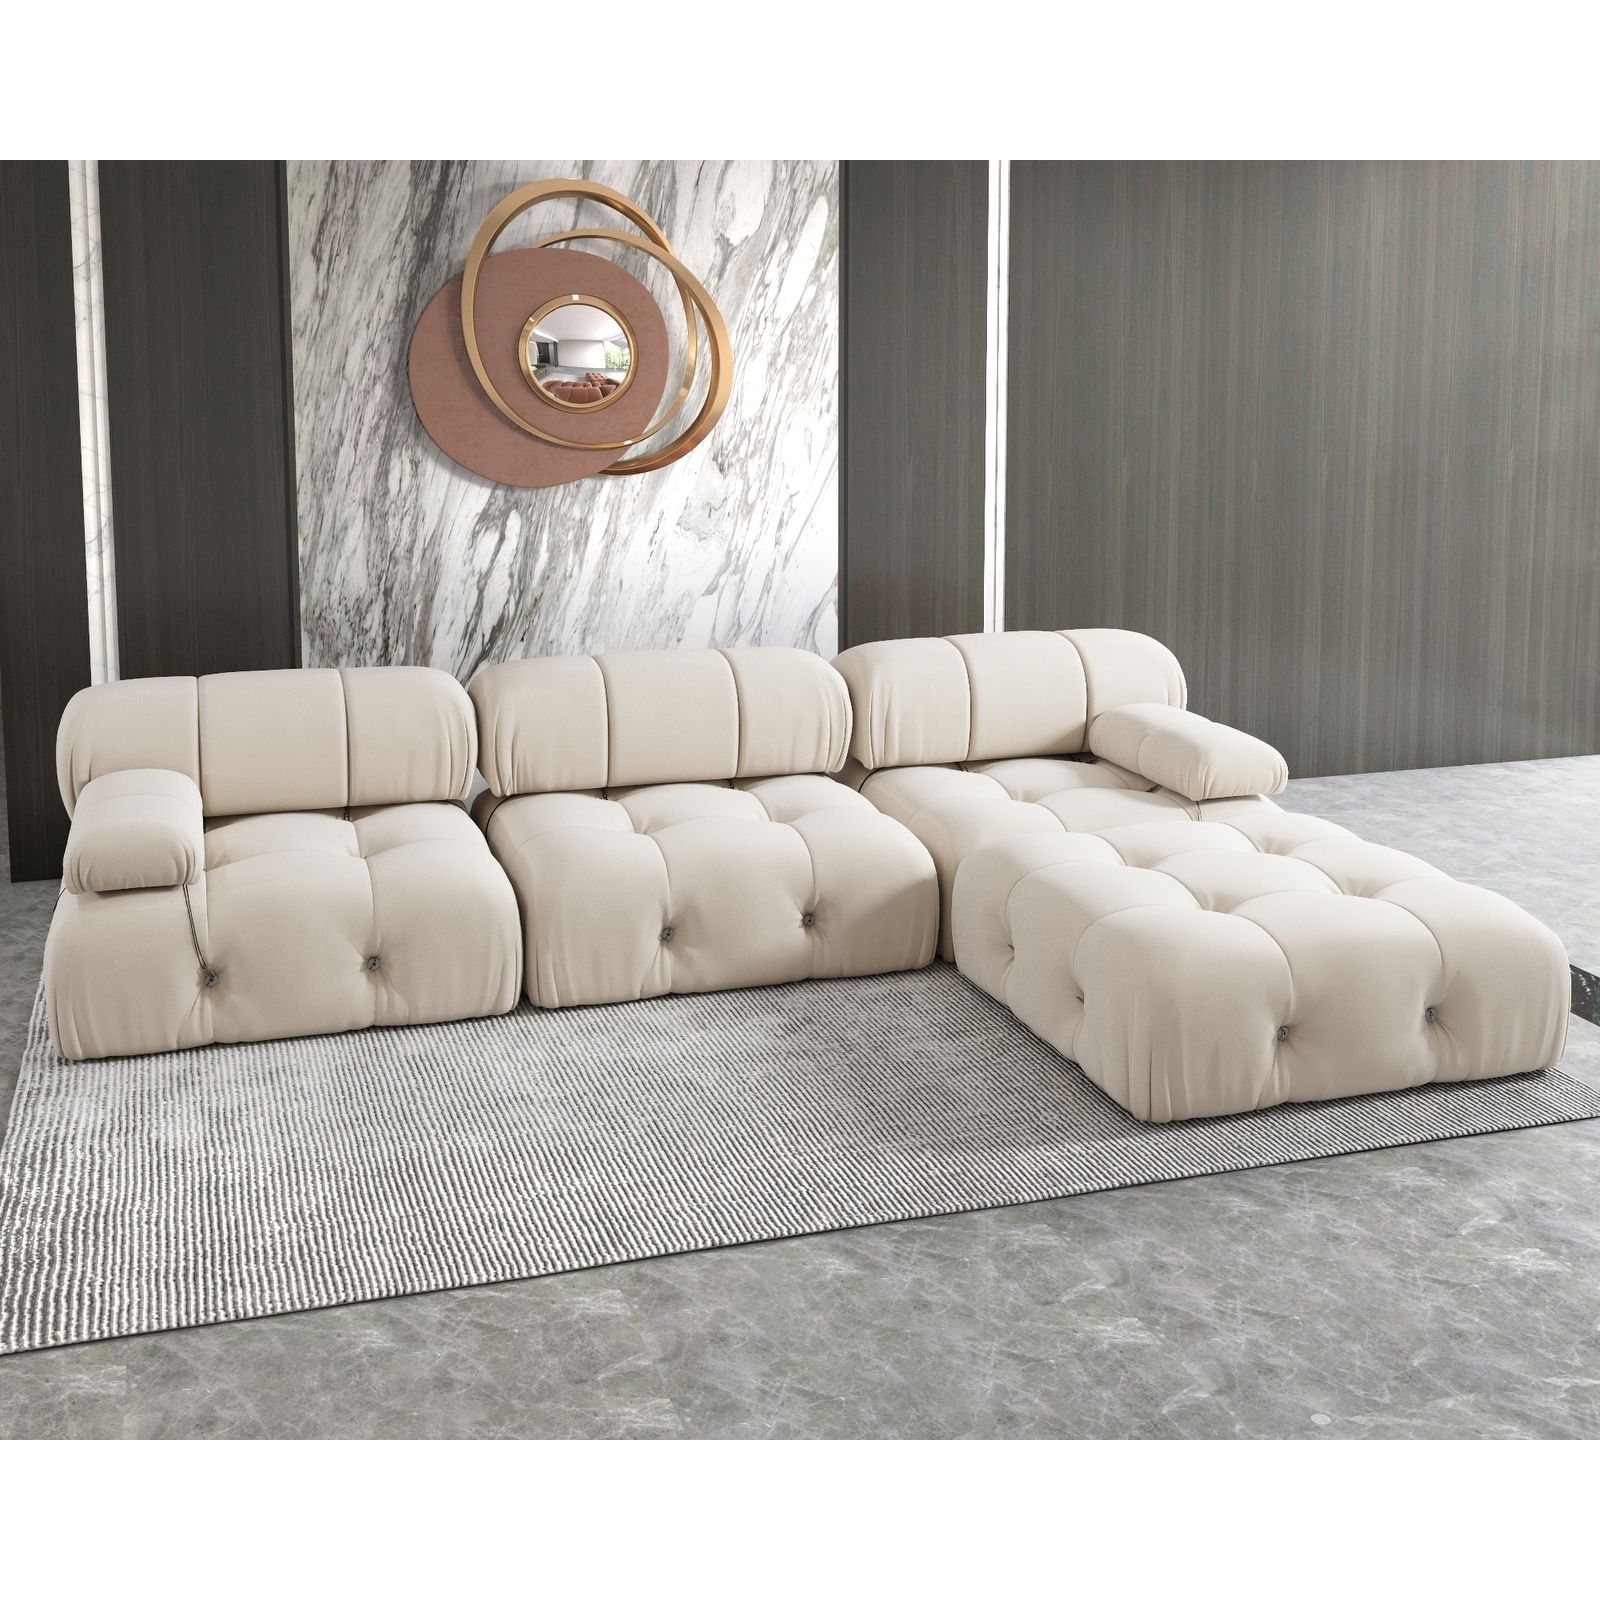 Modern Velvet Upholstered Large Modular Sectional Sofa – On Sale – –  35271394 With Regard To Upholstered Modular Couches With Storage (View 6 of 20)